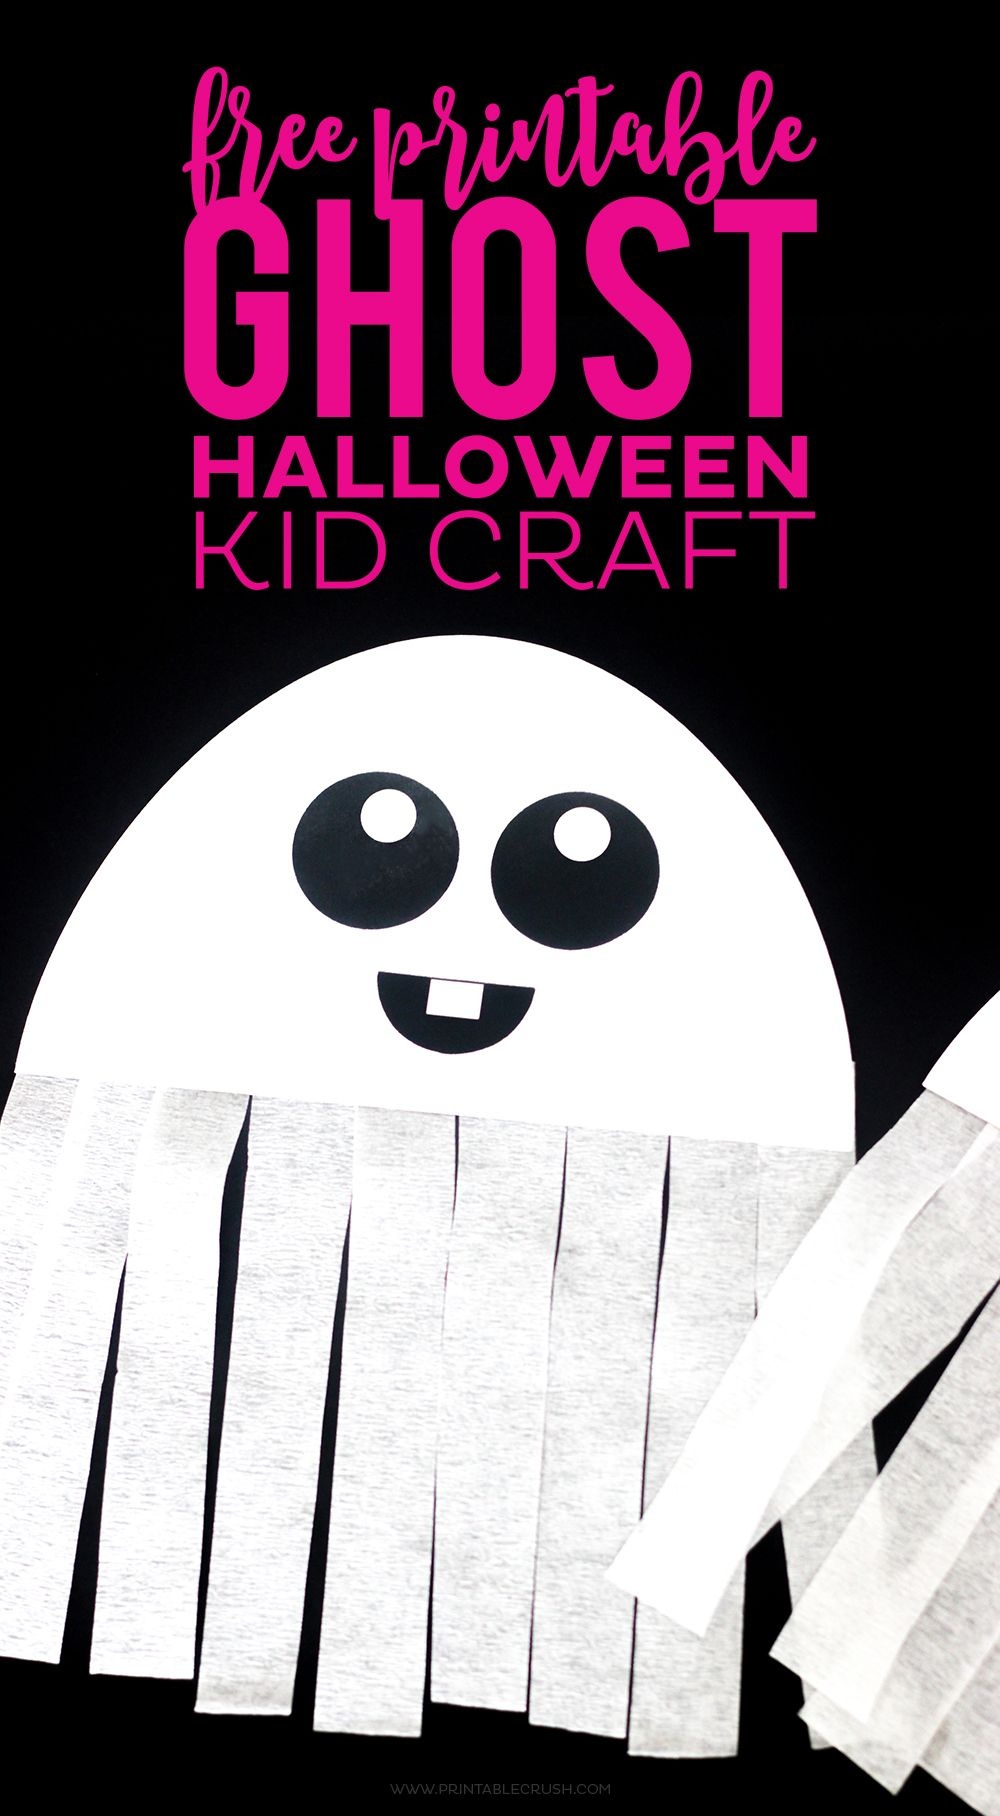 This Free Printable Ghost Halloween Craft Would Be A Great Activity - Halloween Crafts For Kids Free Printable